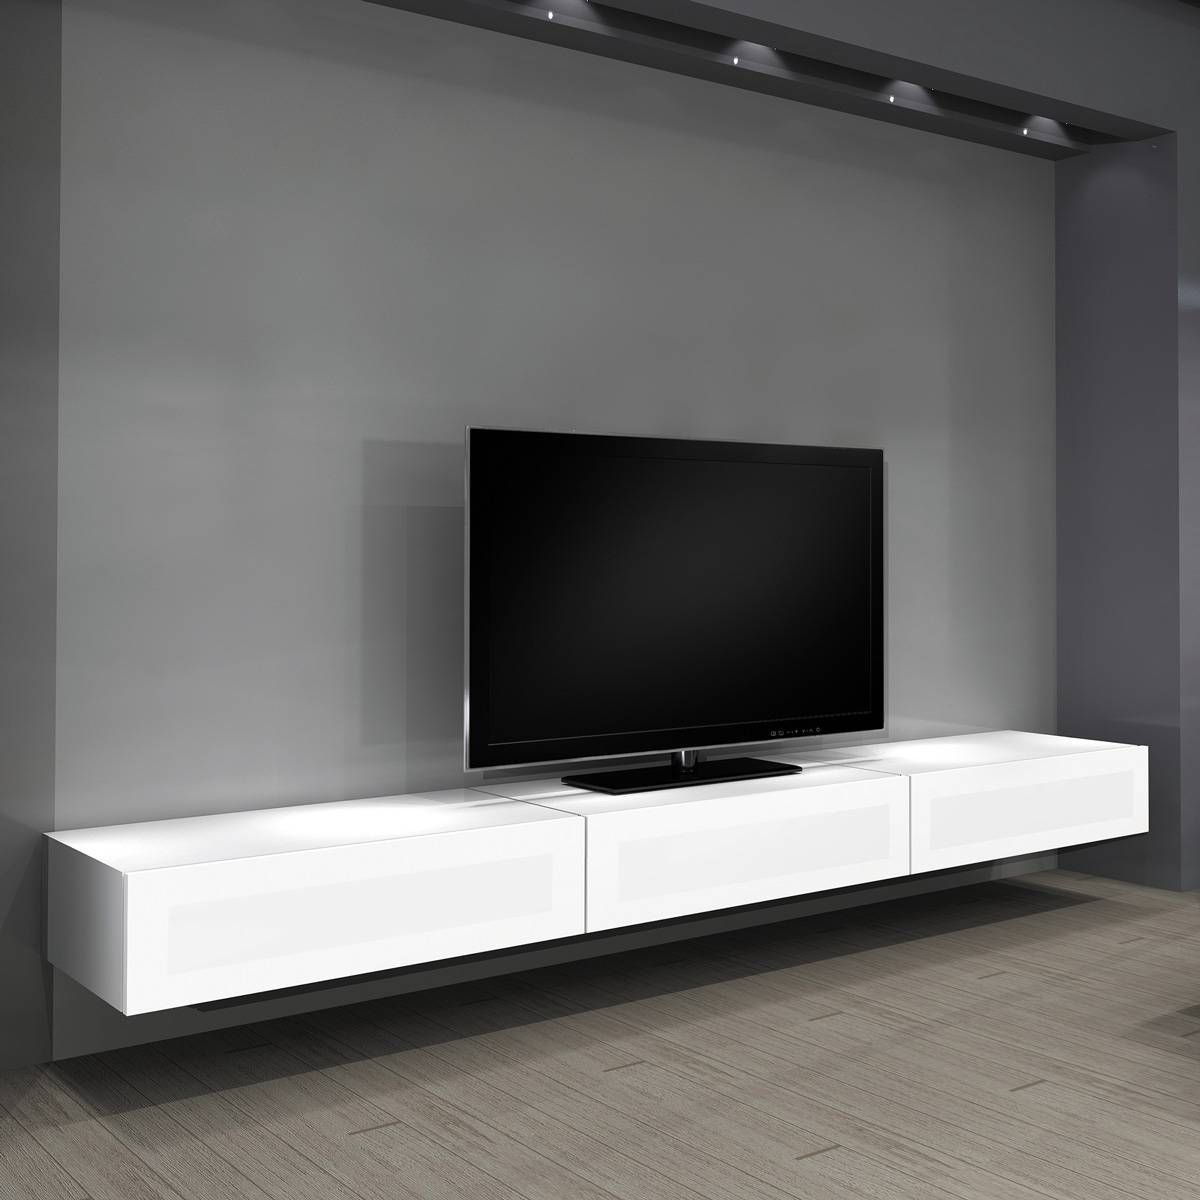 Furniture: Modern Wall Mount Entertainment Center In White With With Regard To Modern Tv Stands With Mount (View 10 of 15)